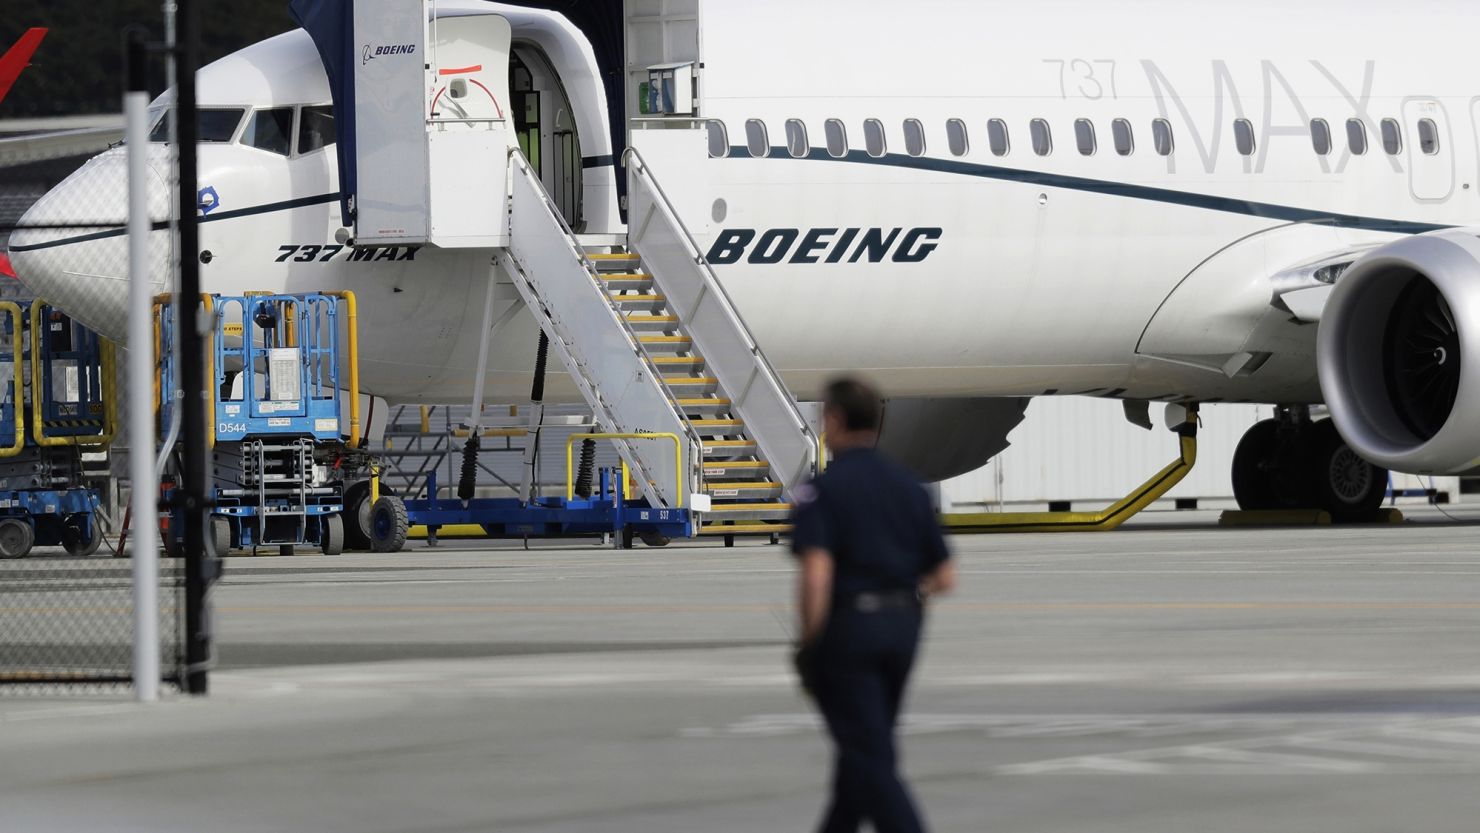 A worker walks next to a Boeing 737 MAX 8 airplane parked at Boeing Field in Seattle, WA, on March 14, 2019.